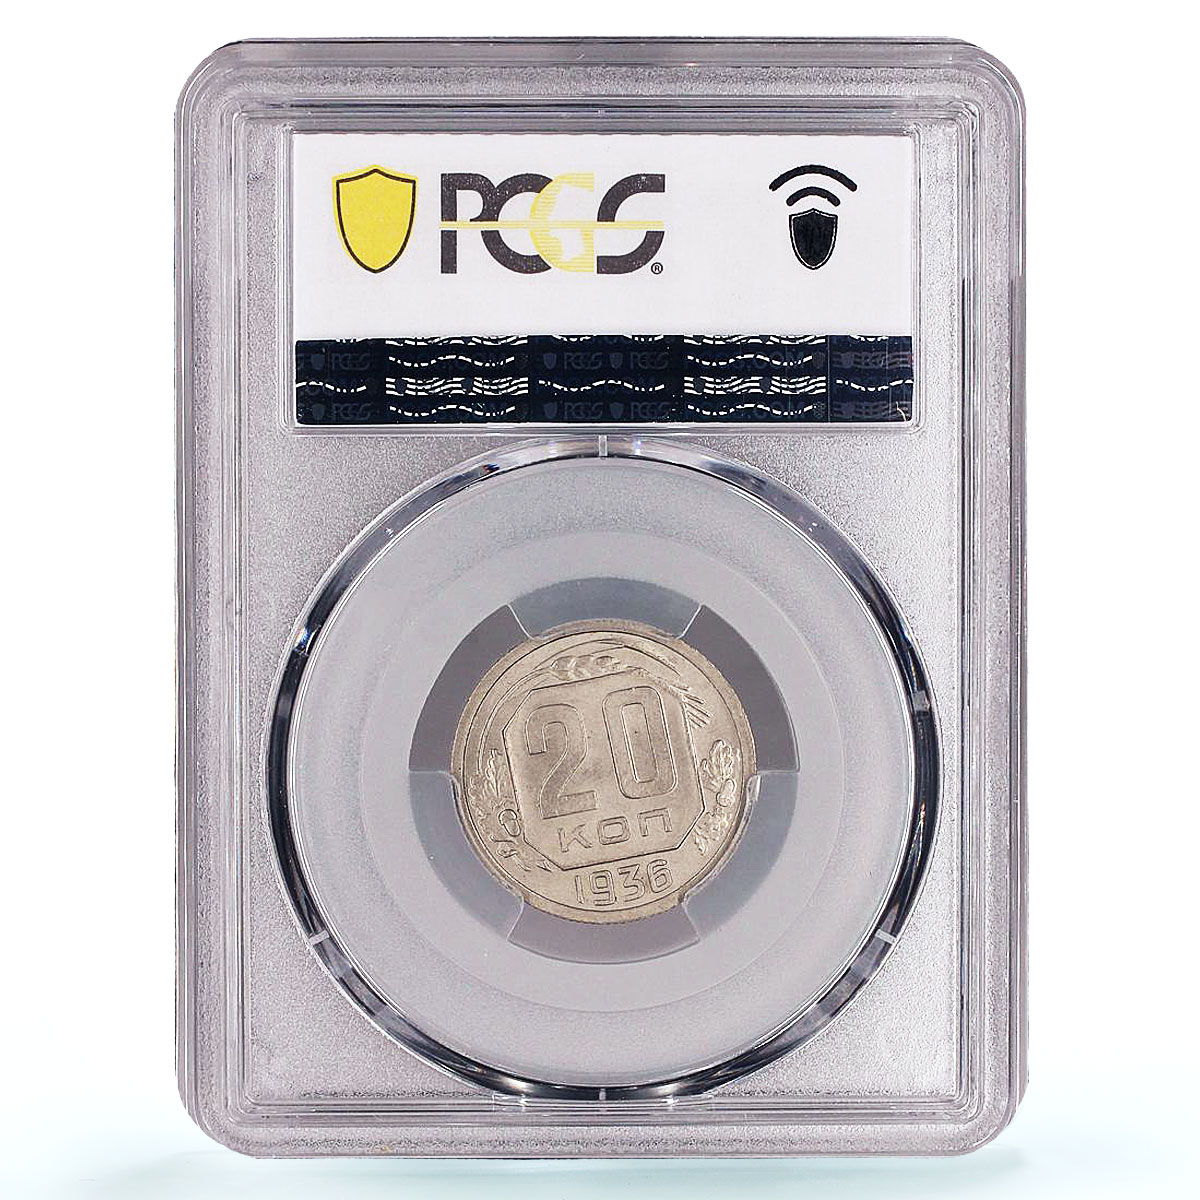 Russia USSR RSFSR 20 kopecks Regular Coinage Y-104 MS65 PCGS CuNi coin 1936